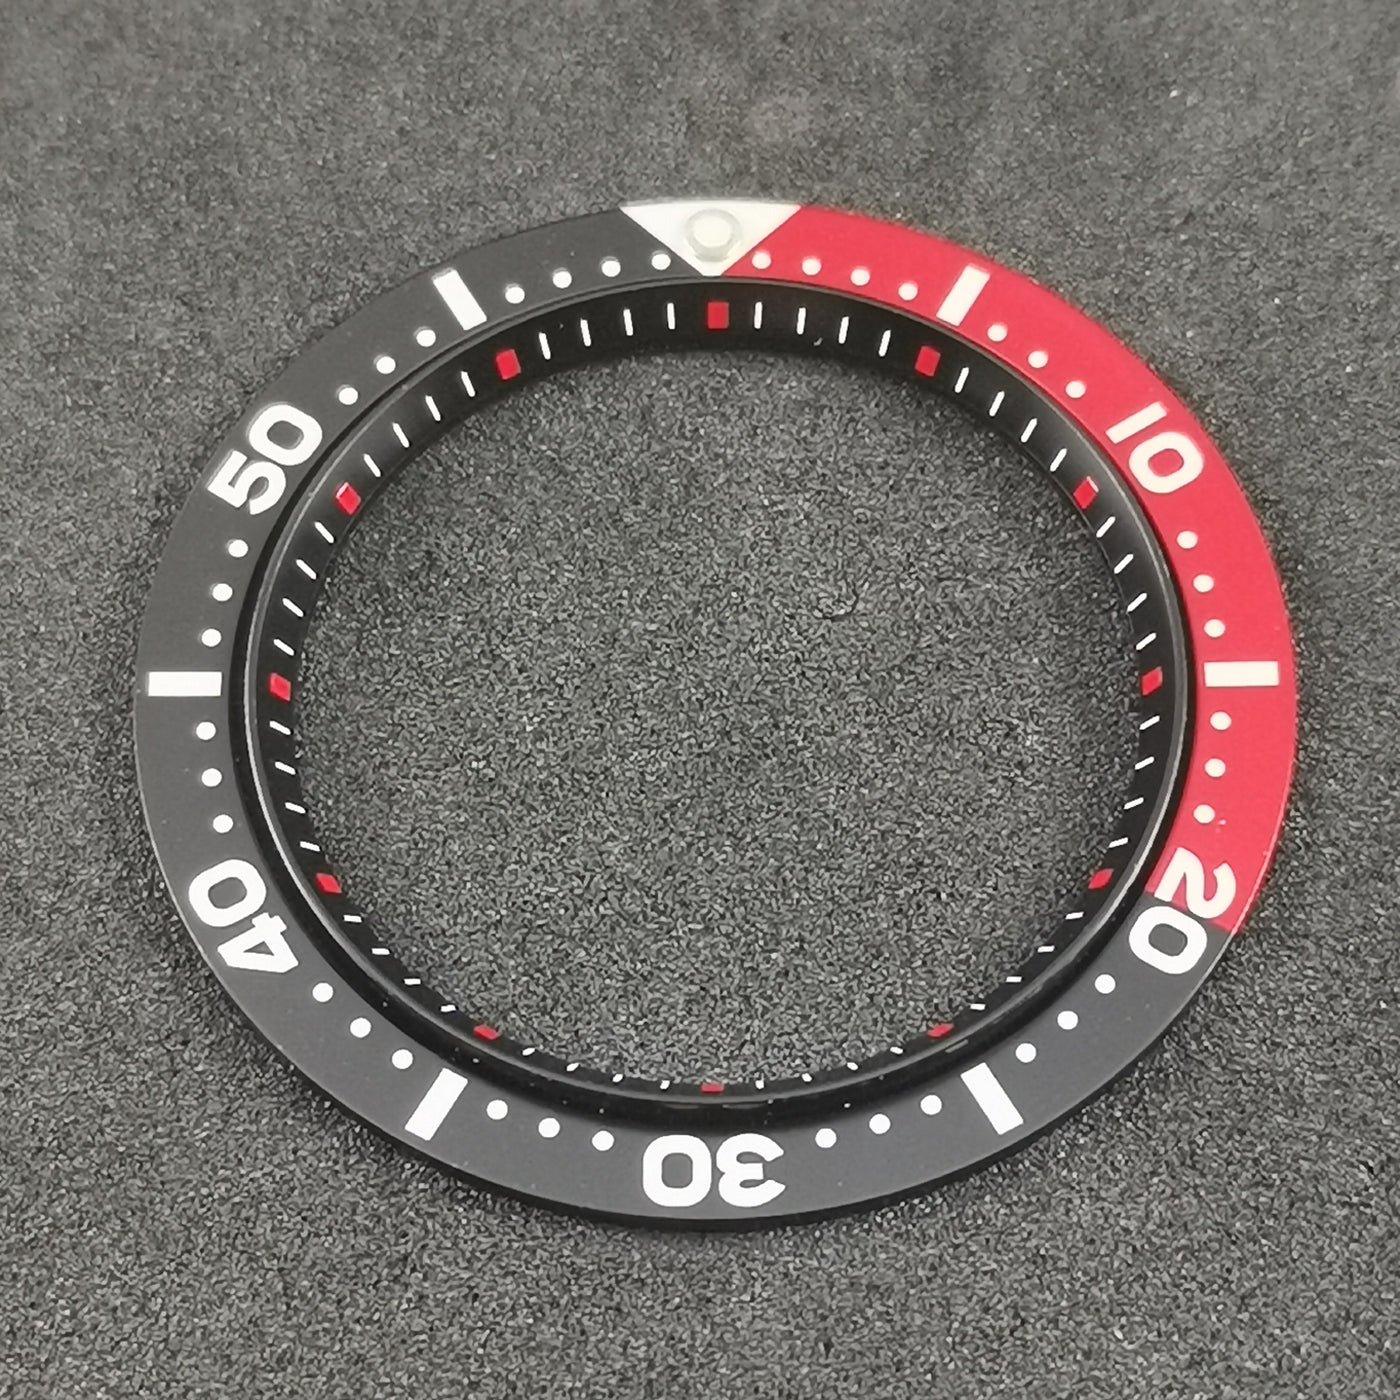 C0195 SKX007/SRPD Chapter Ring-Black with Red Marker